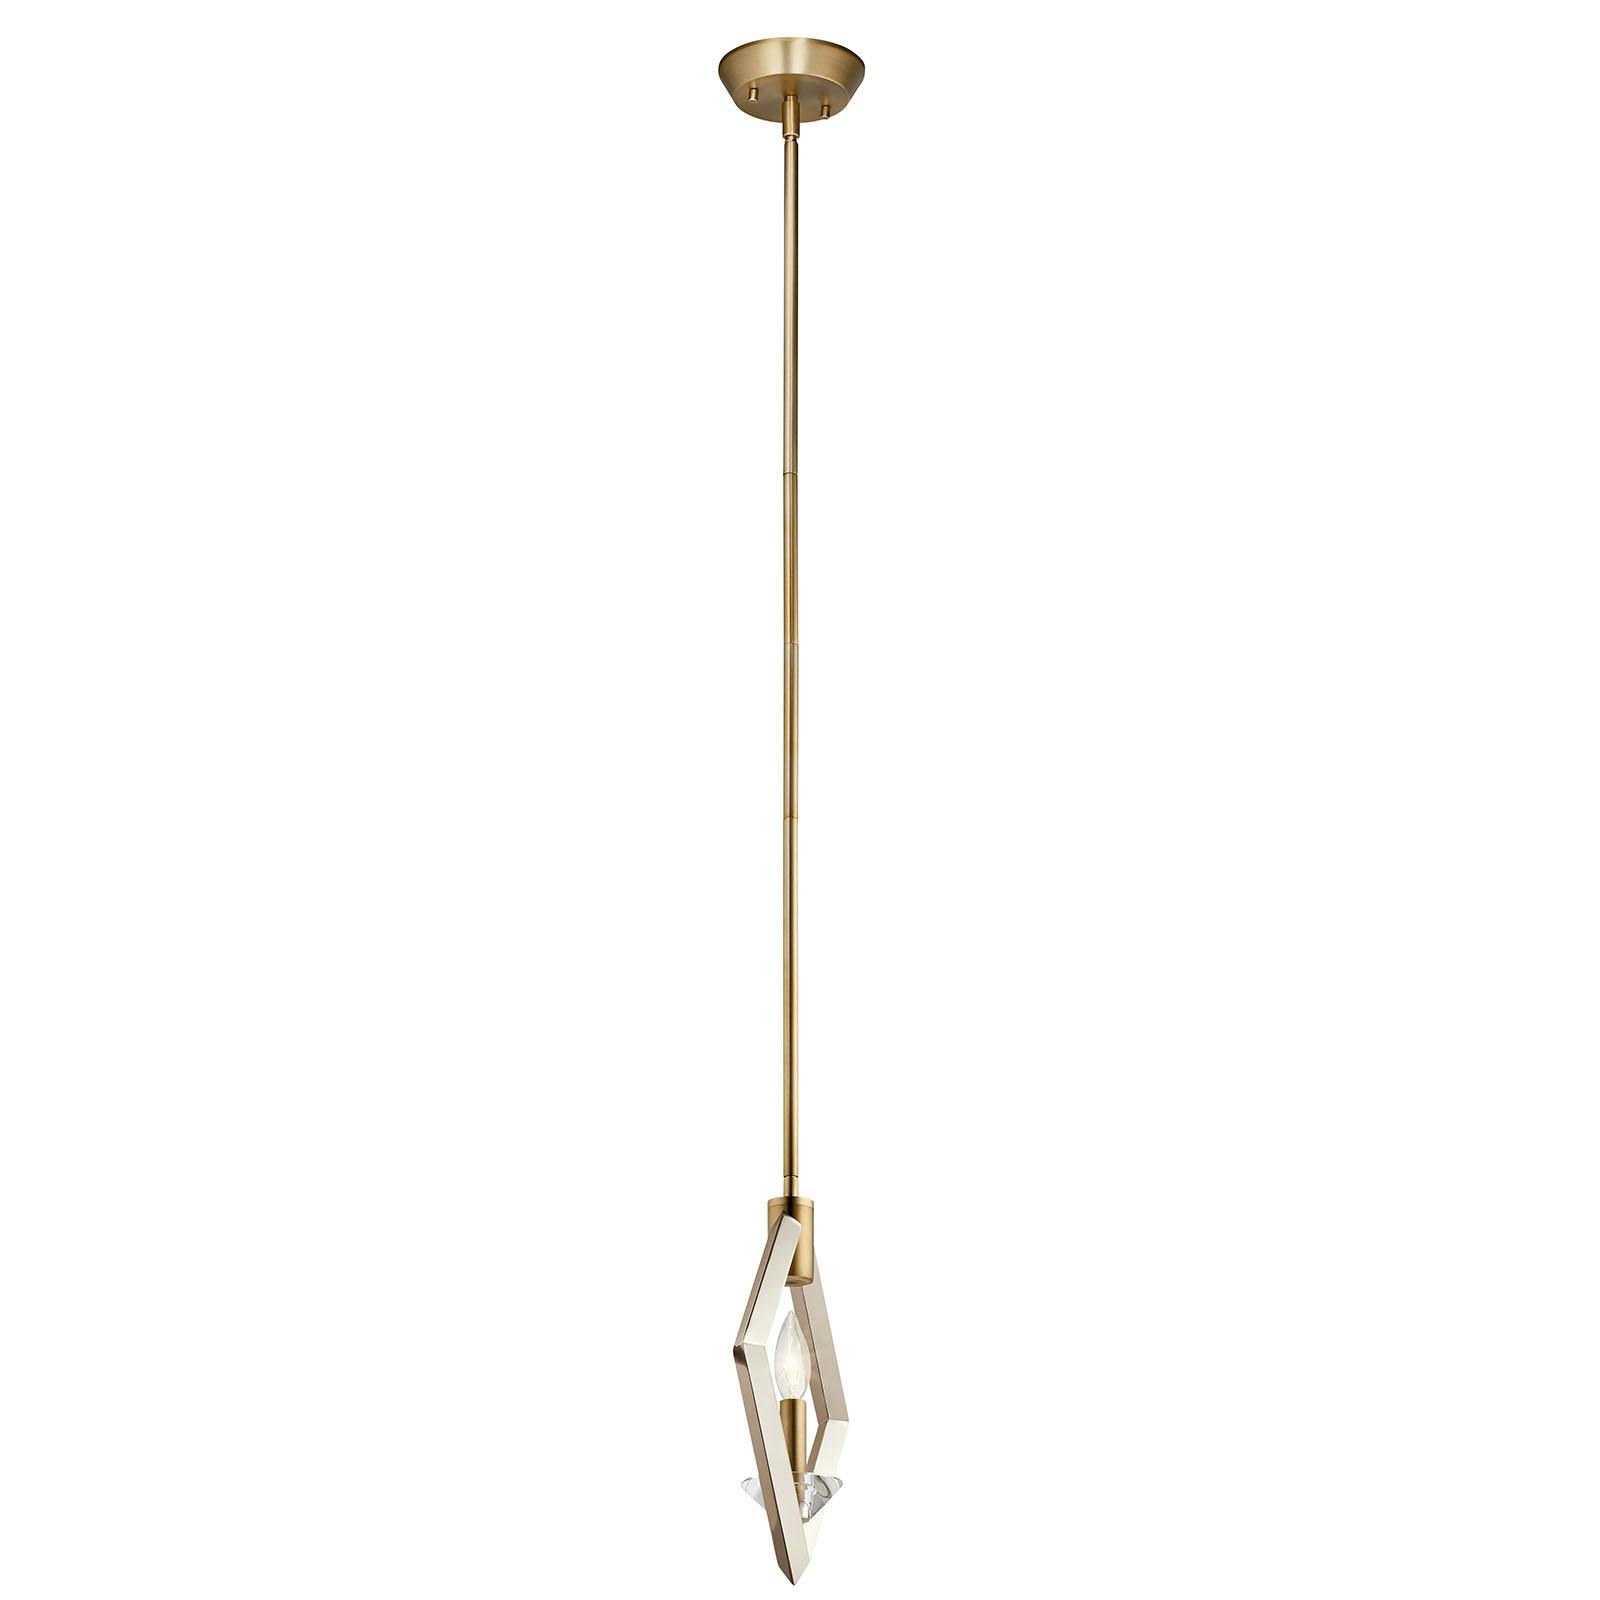 Profile view of the Layan™ Mini Pendant Polished Nickel on a white background